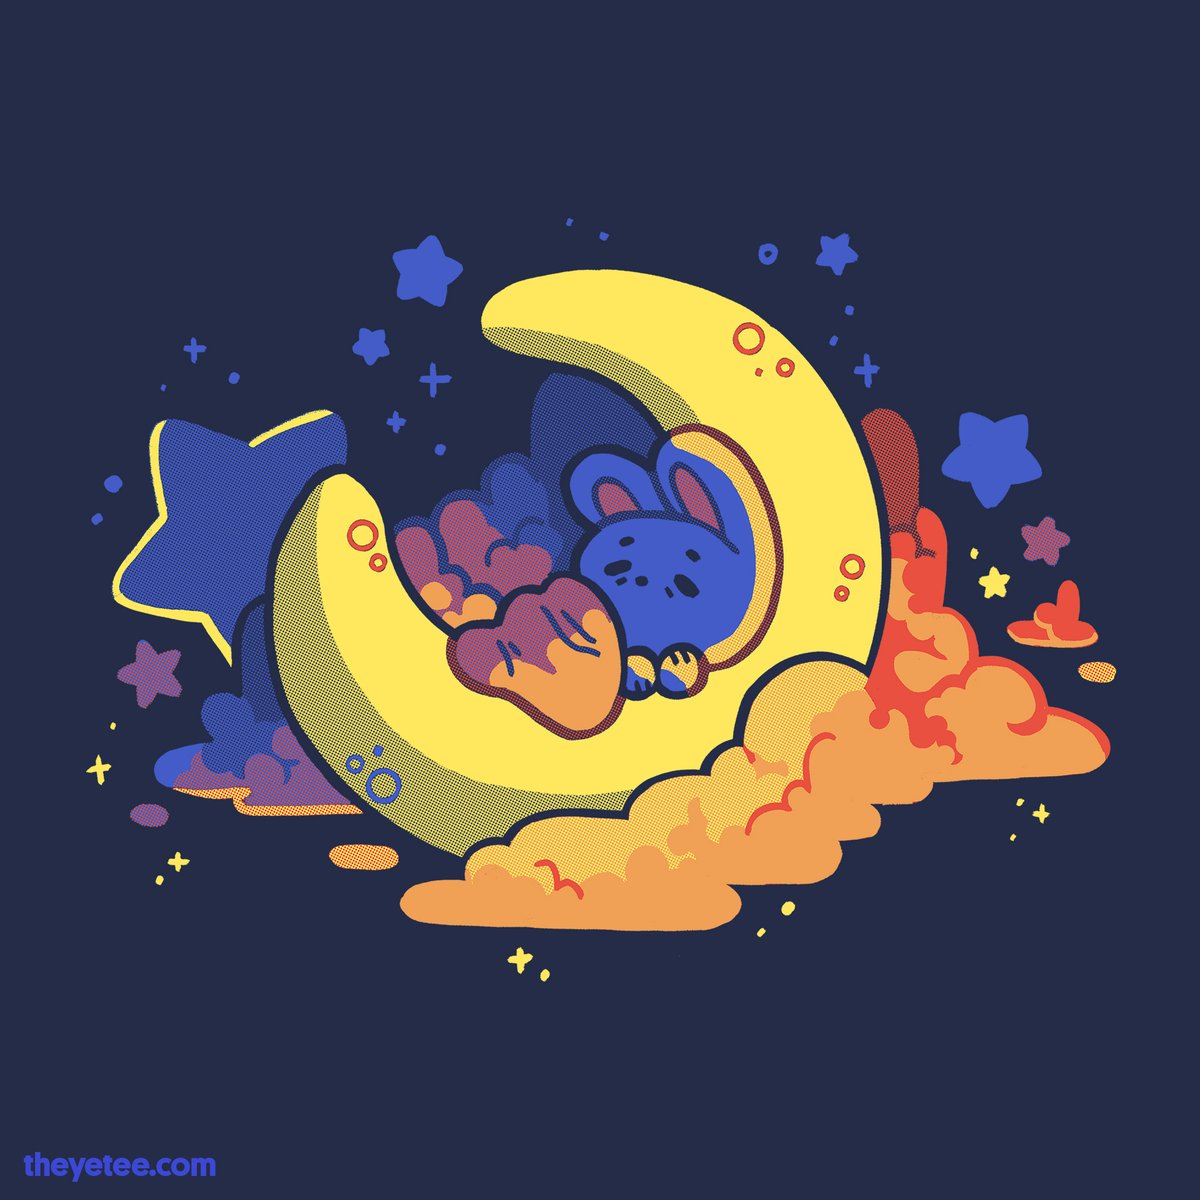 「We've been waxing and waning all night l」|The Yetee 🌈のイラスト